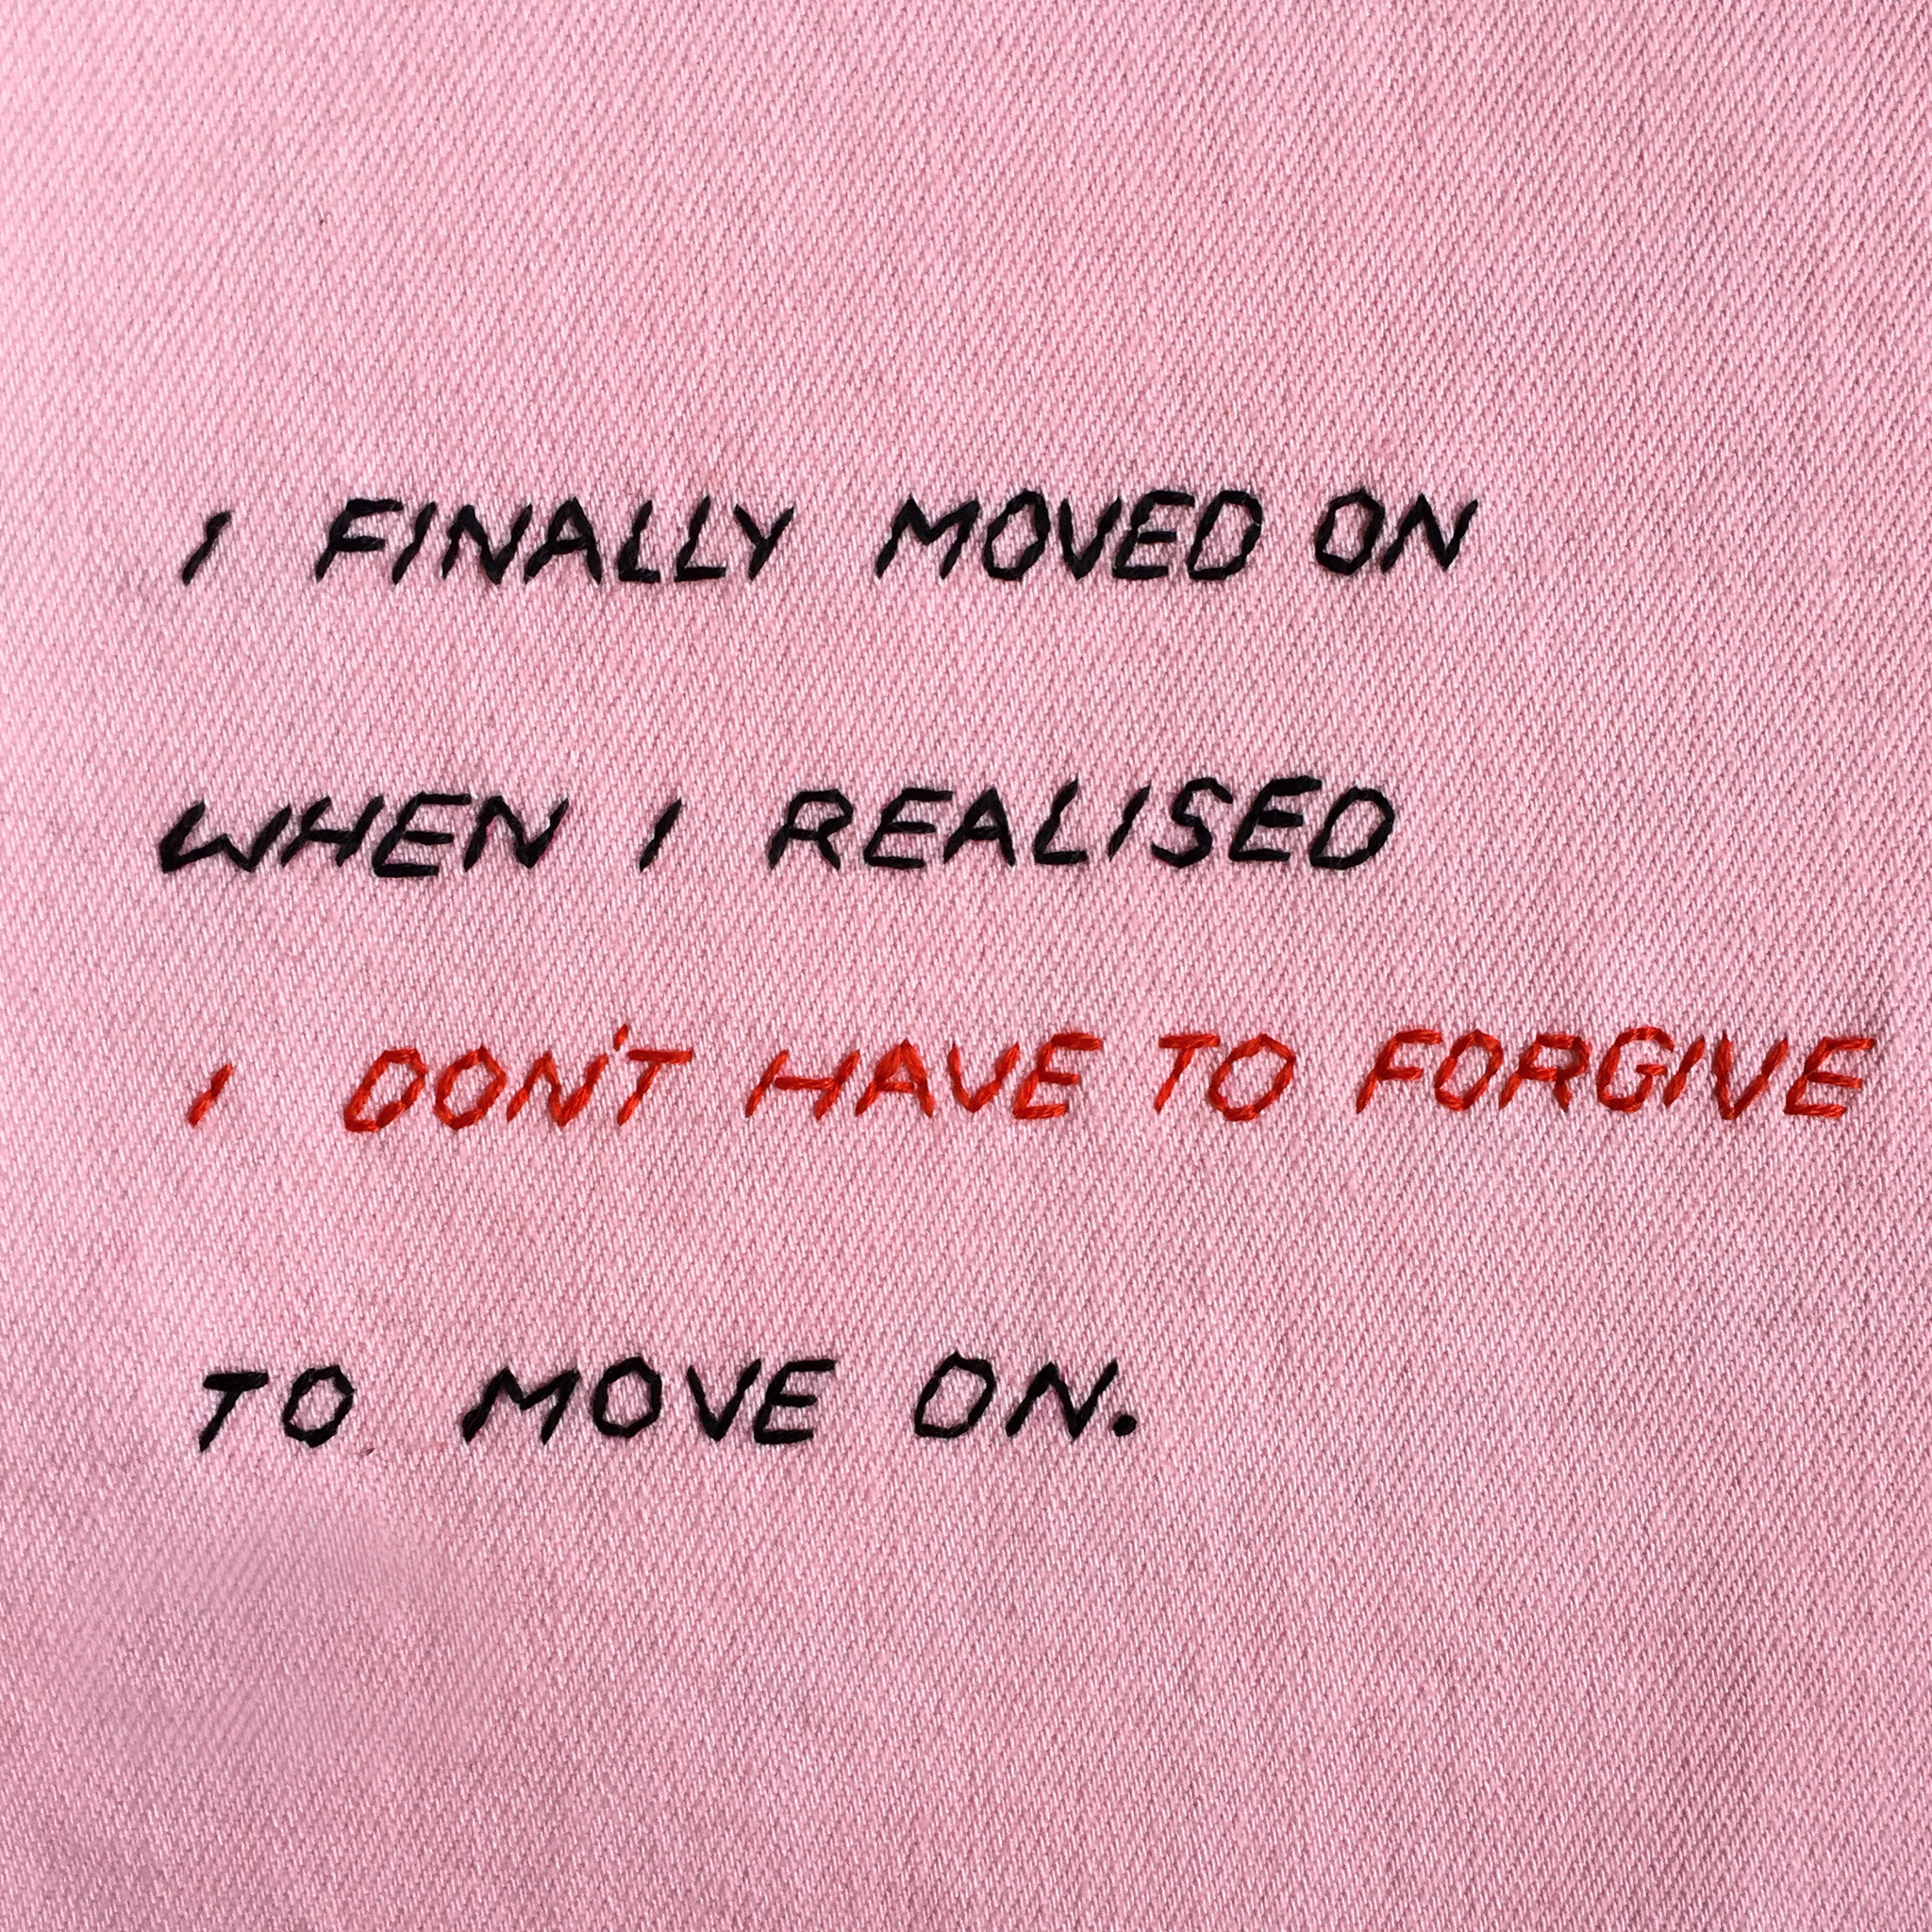 embroidered "I finally moved on when I realised I don't have to forgive to move on", 2019, Sophie King